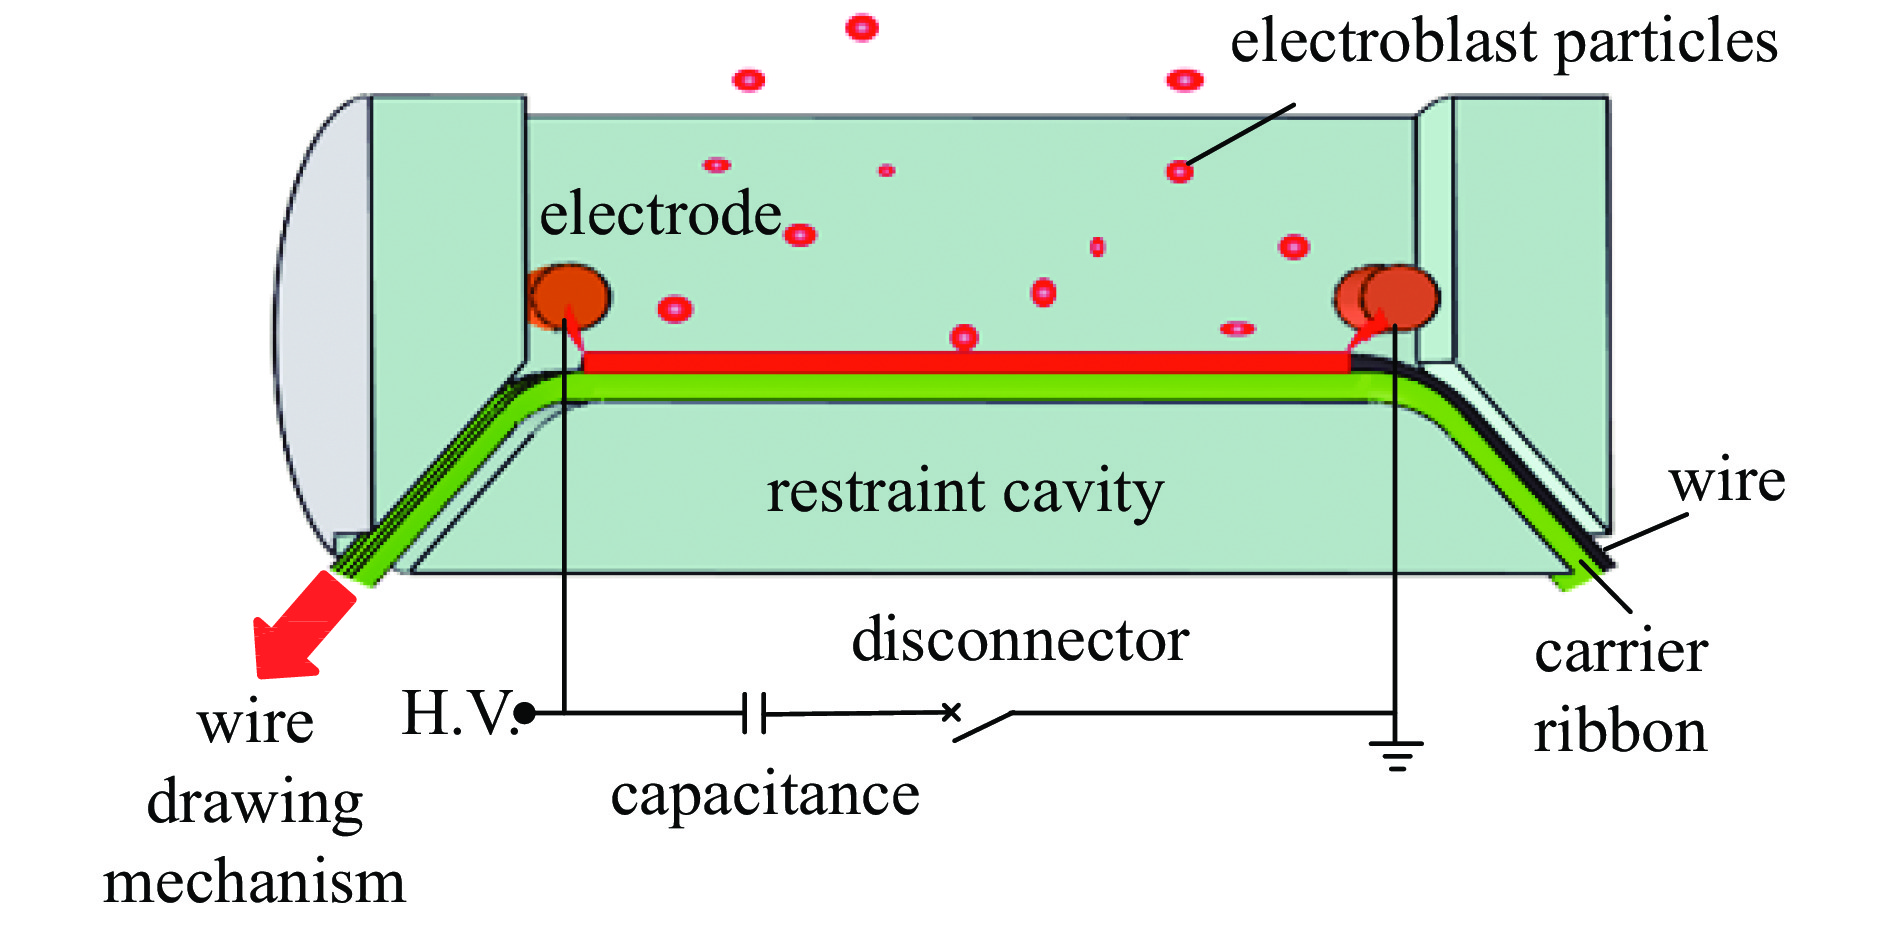 Diagram of electrical explosion carrier wire